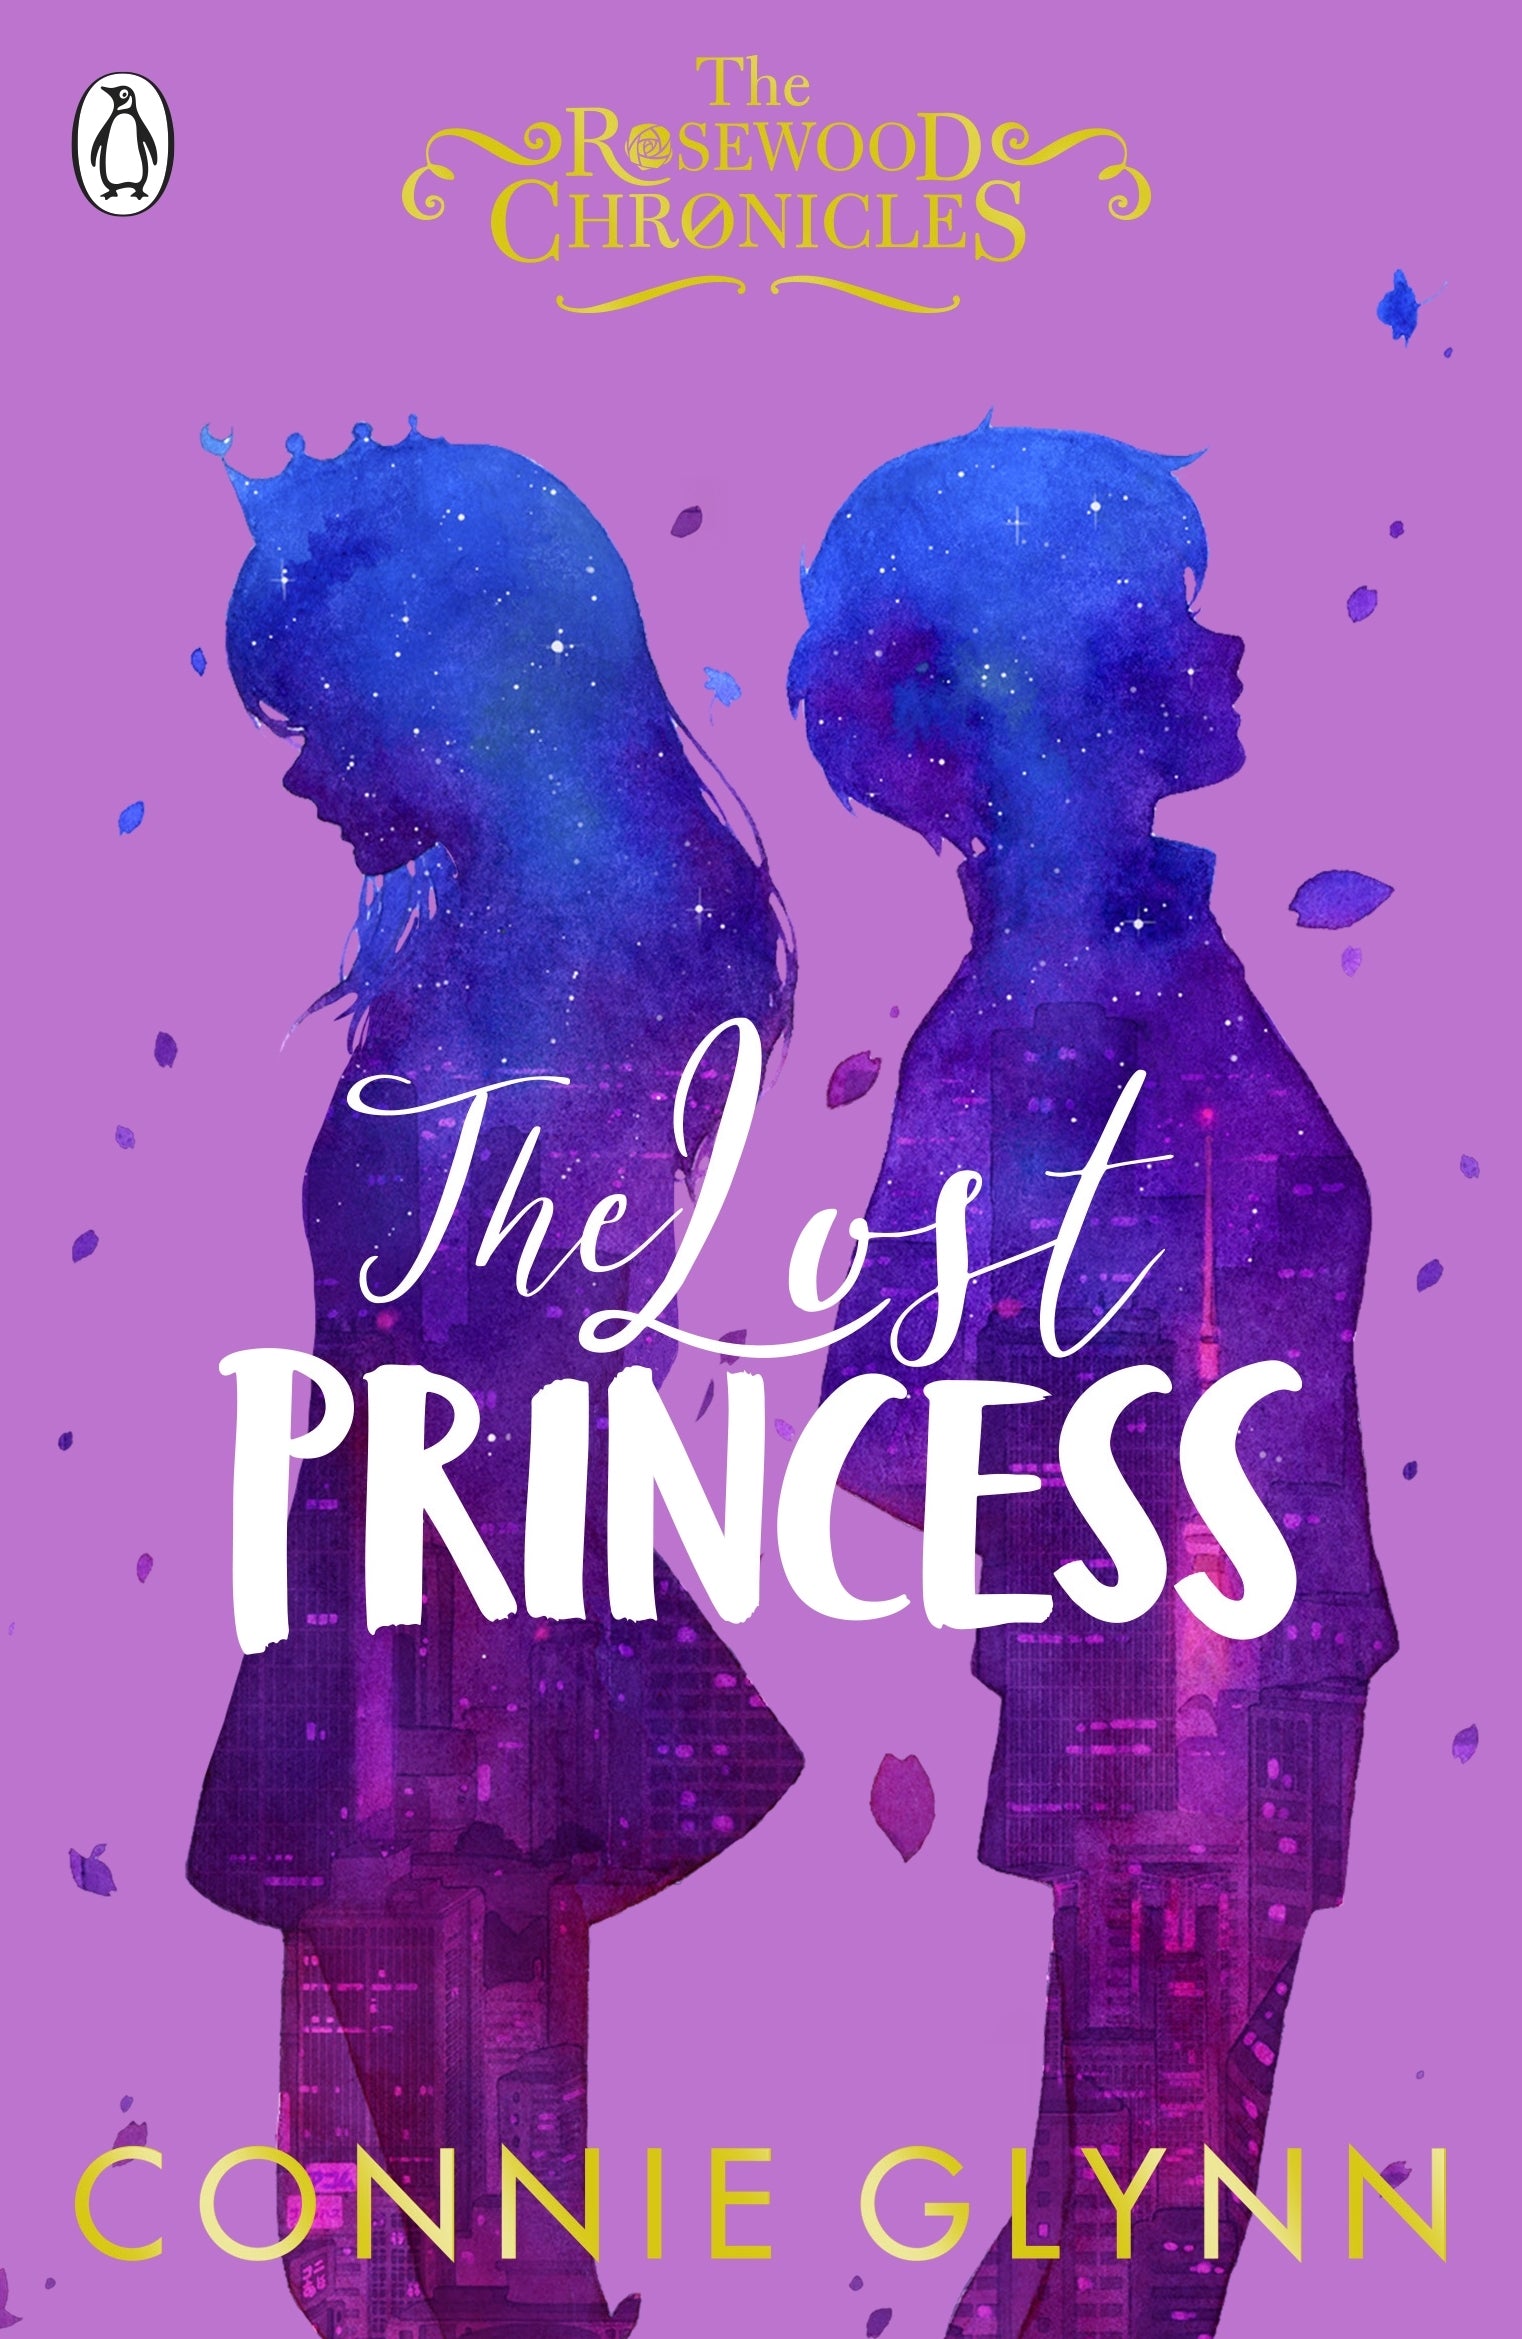 The Rosewood Chronicles#3: The Lost Princess Connie Glynn